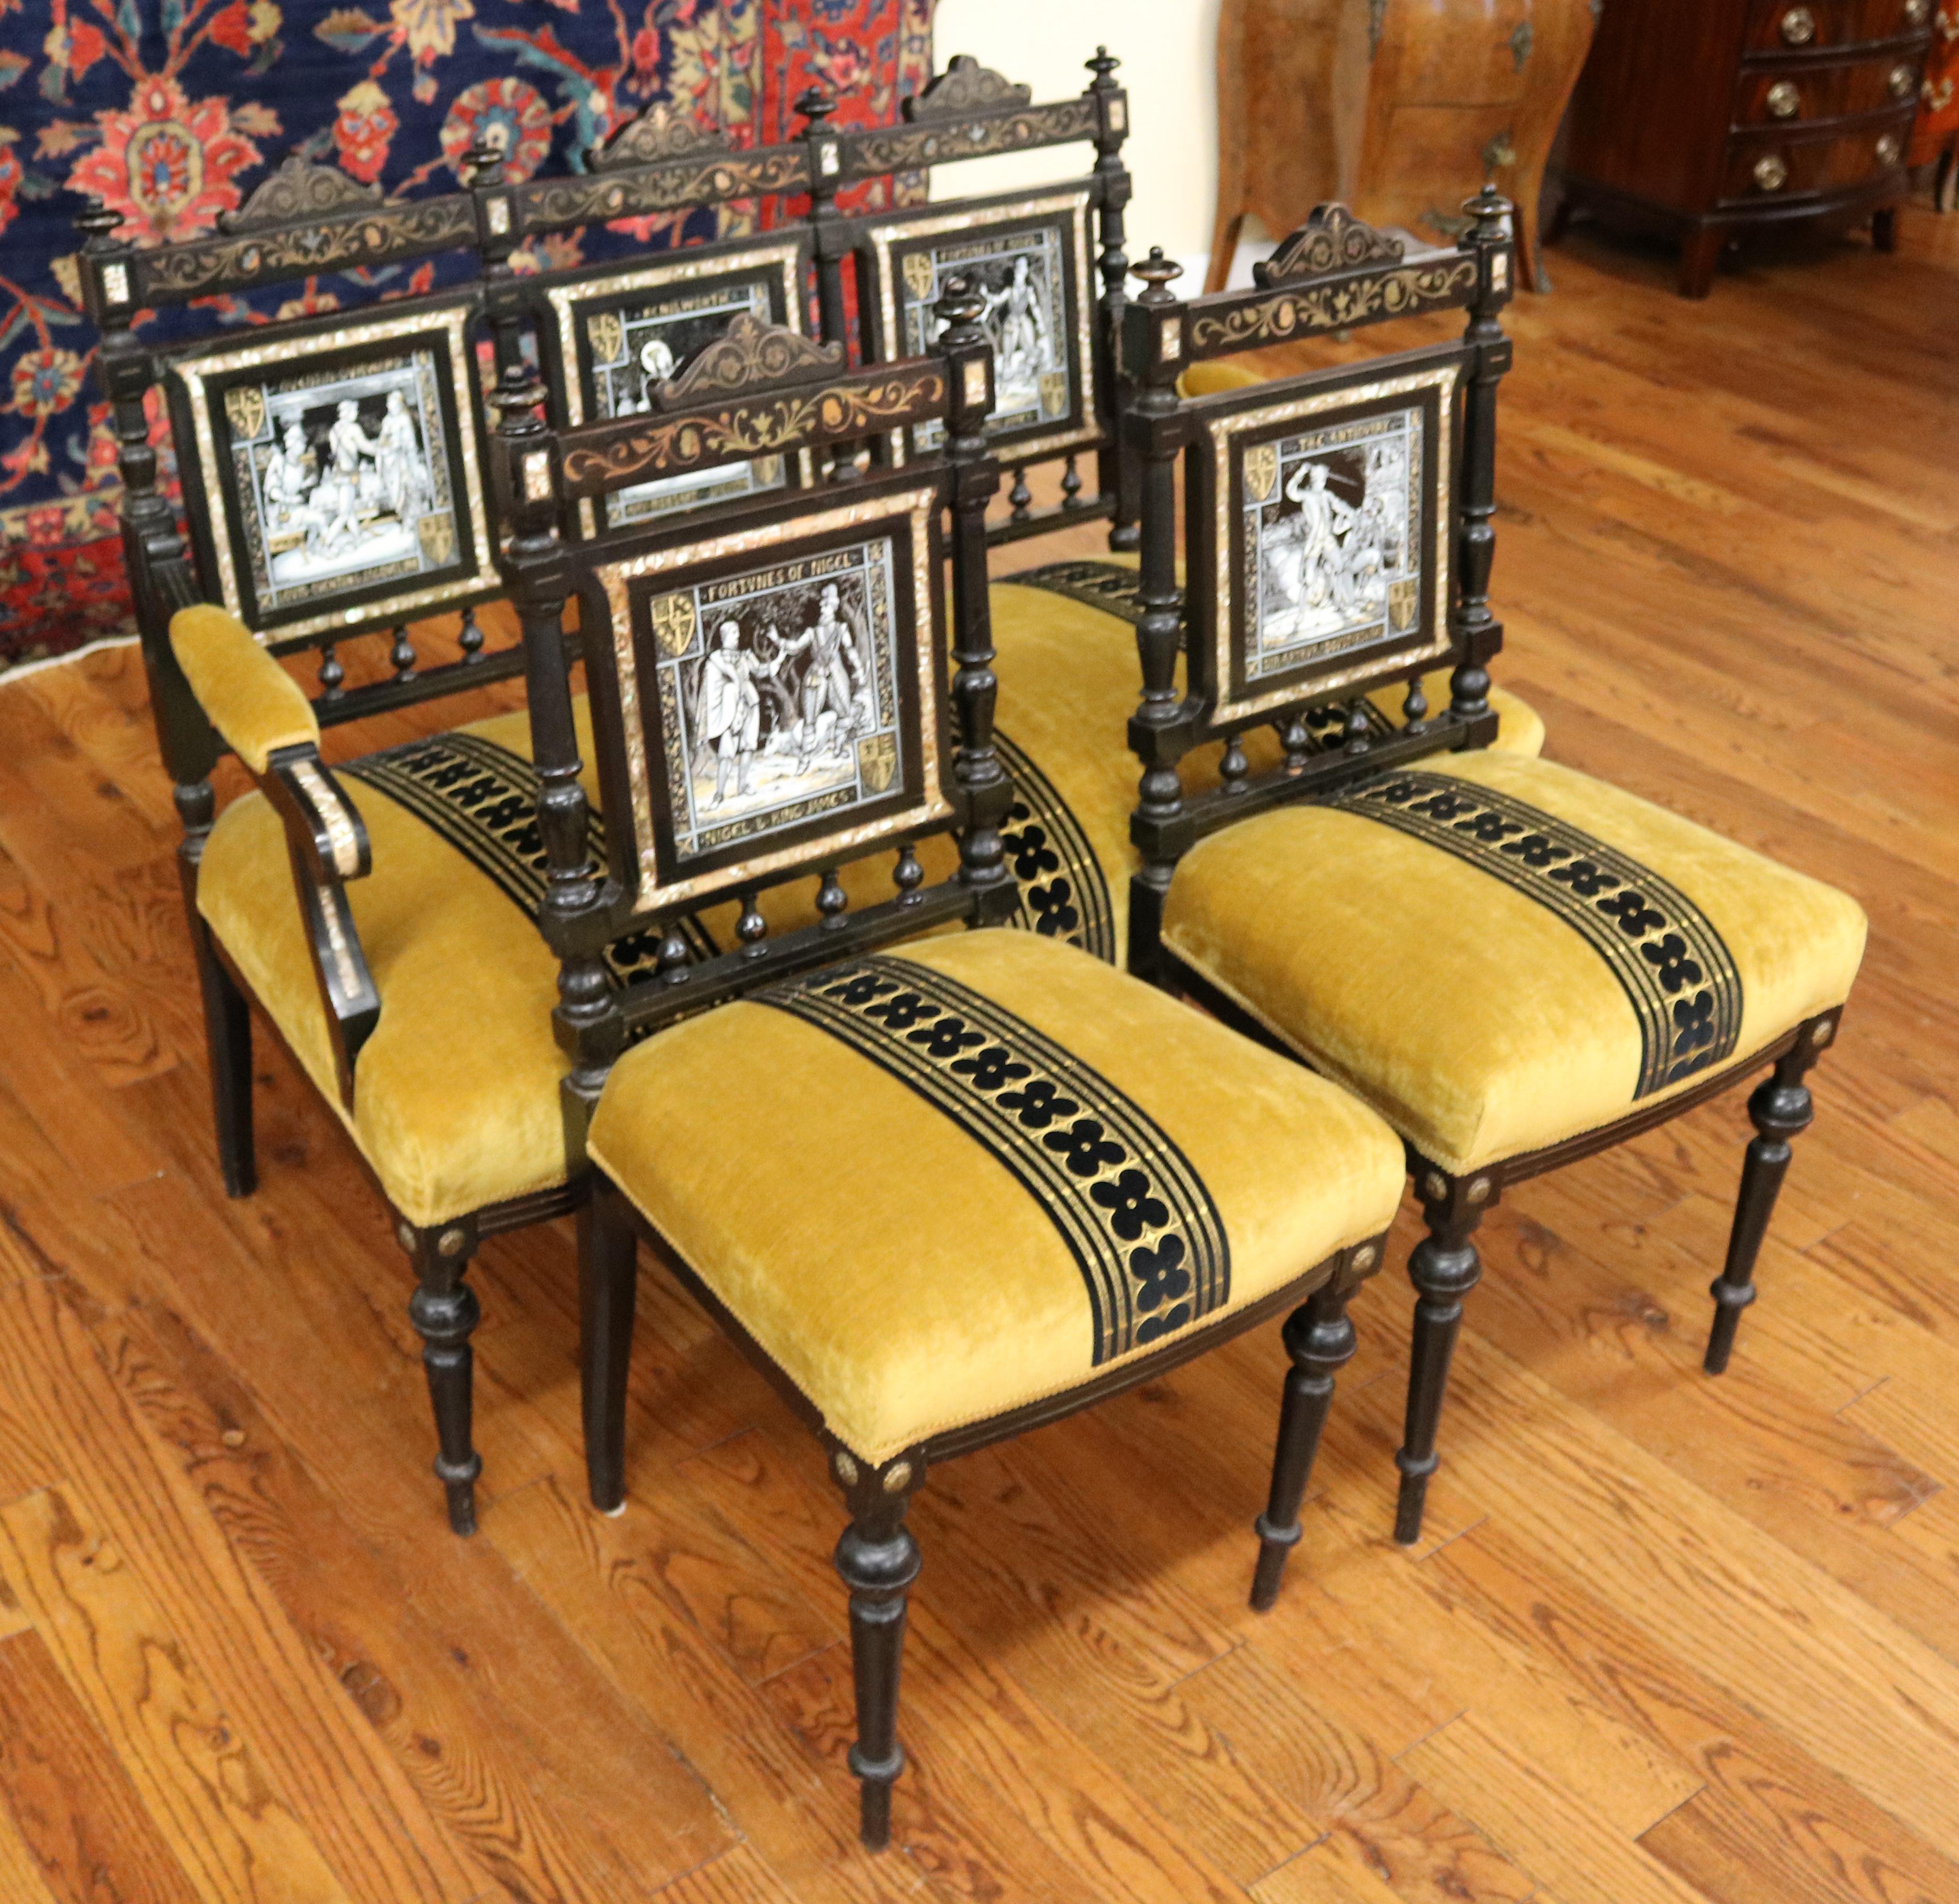 19th Century Aesthetic Victorian Parlor Set Settee & 4 Chairs By John Moyr Smith In Good Condition For Sale In Long Branch, NJ